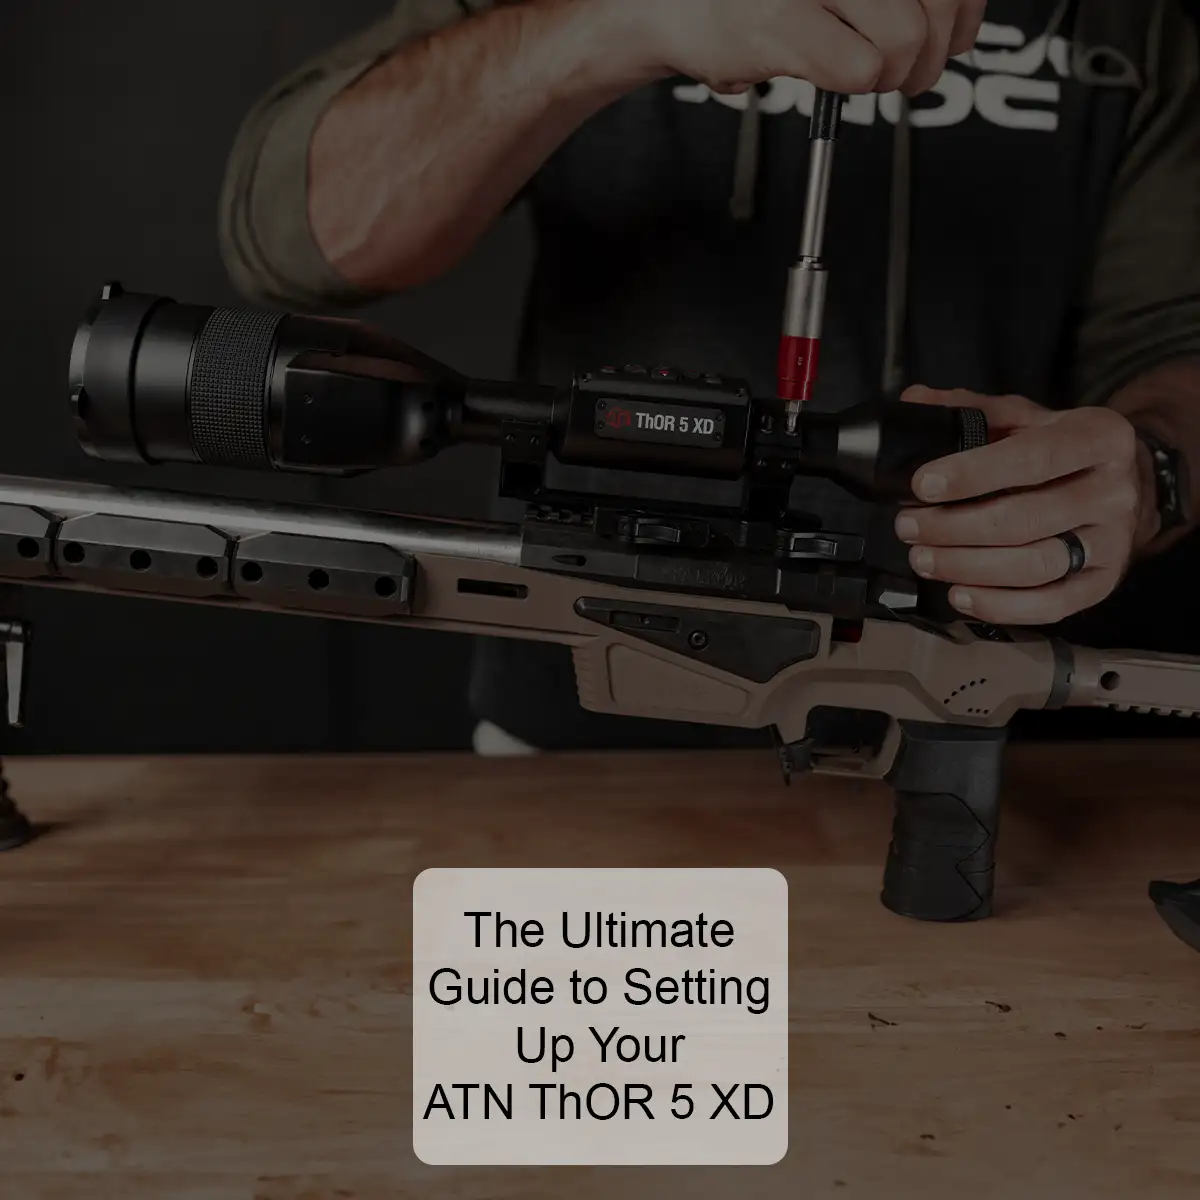 The Ultimate Guide to Setting Up Your ATN ThOR 5 XD